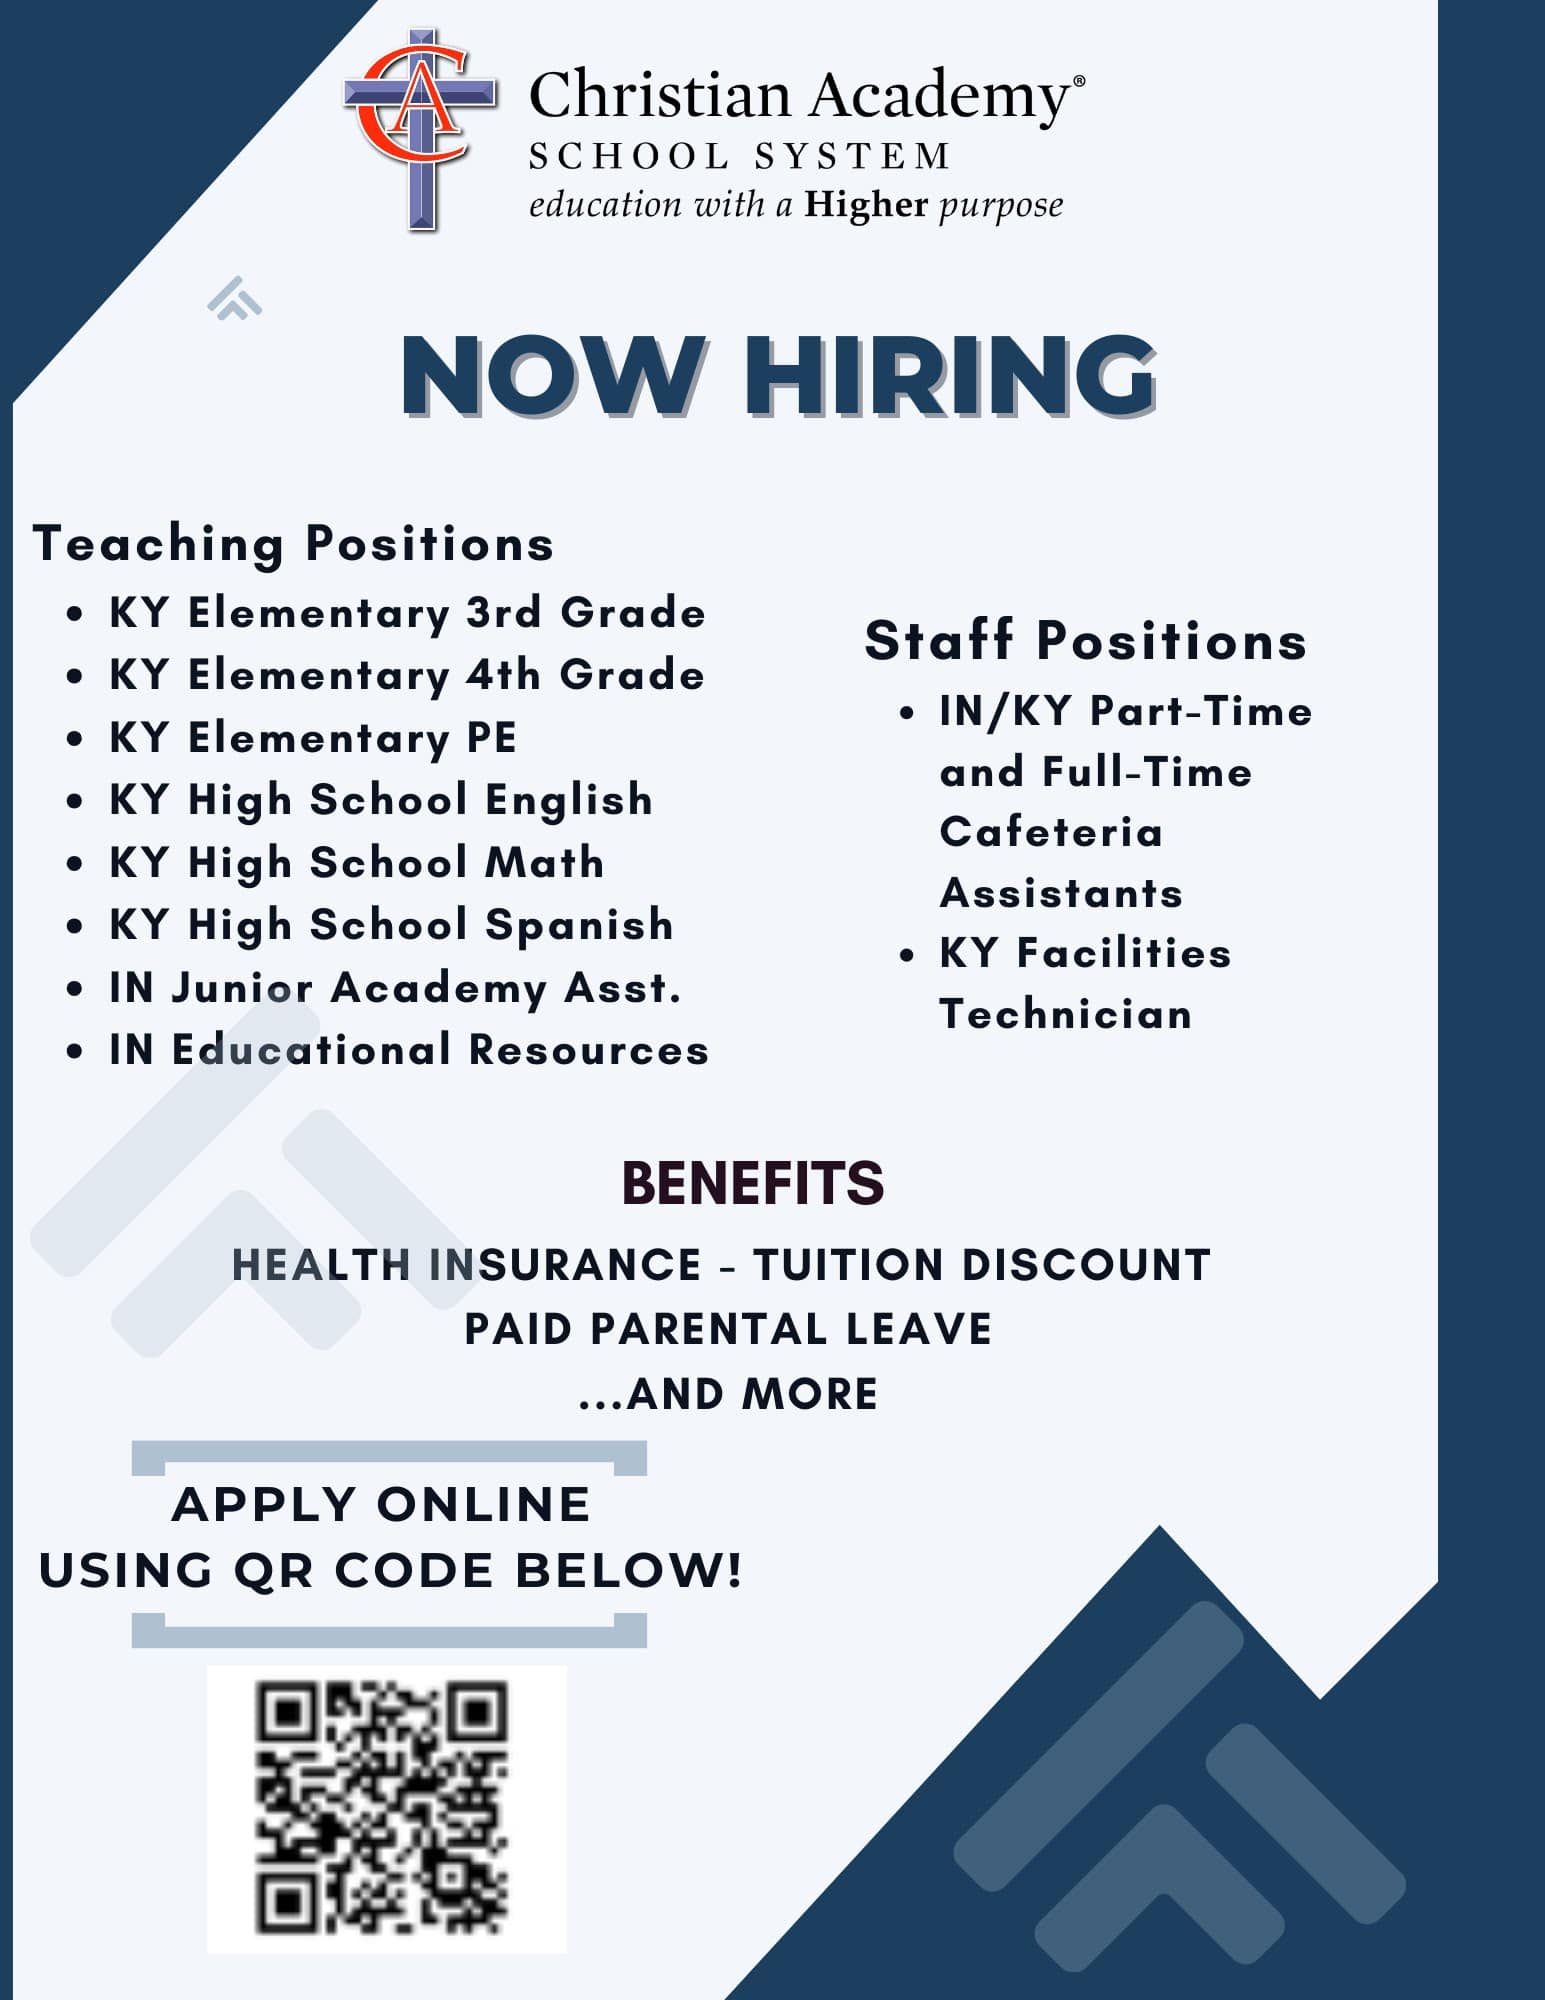 Christian Academy School System | Human Resources | Now Hiring